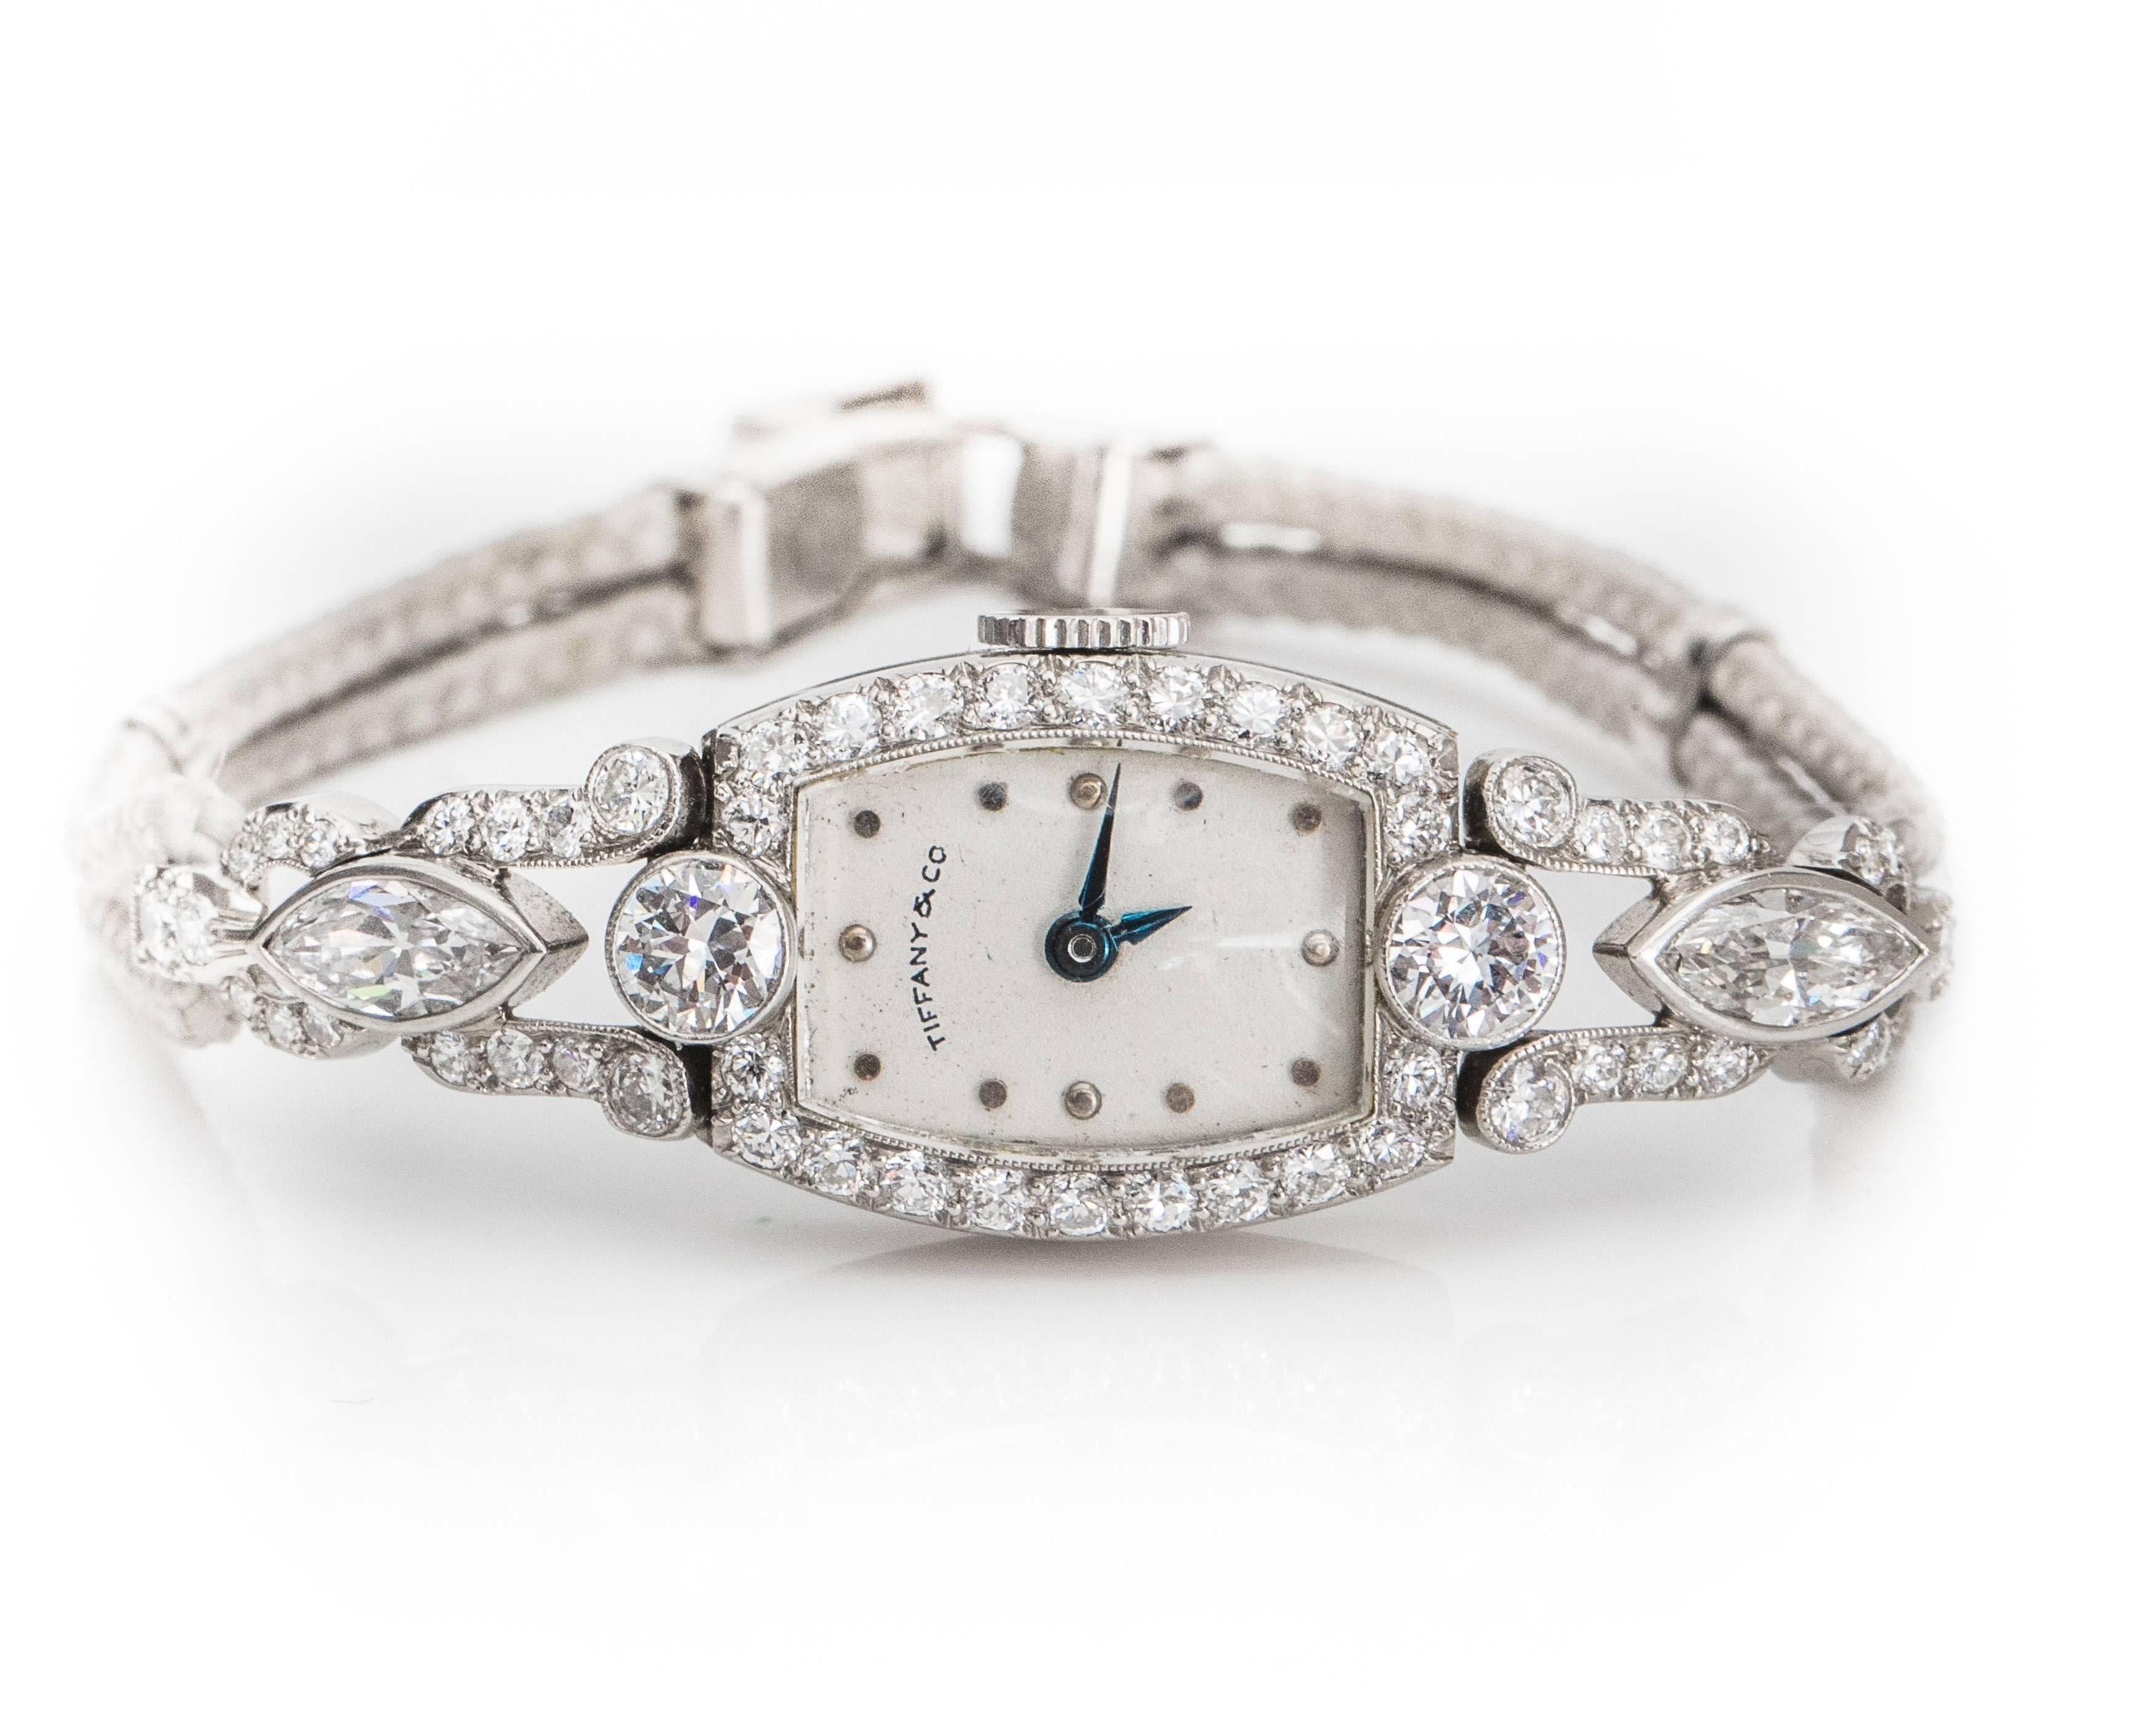 This stunning 1905 Antique Tiffany and Co Diamond and Platinum watch exemplifies Luxury at it's Finest! 
This elegant Edwardian timepiece features 3 carats of Old European and Marquise diamonds. 
Old European prong set diamonds adorn the bezel, lugs